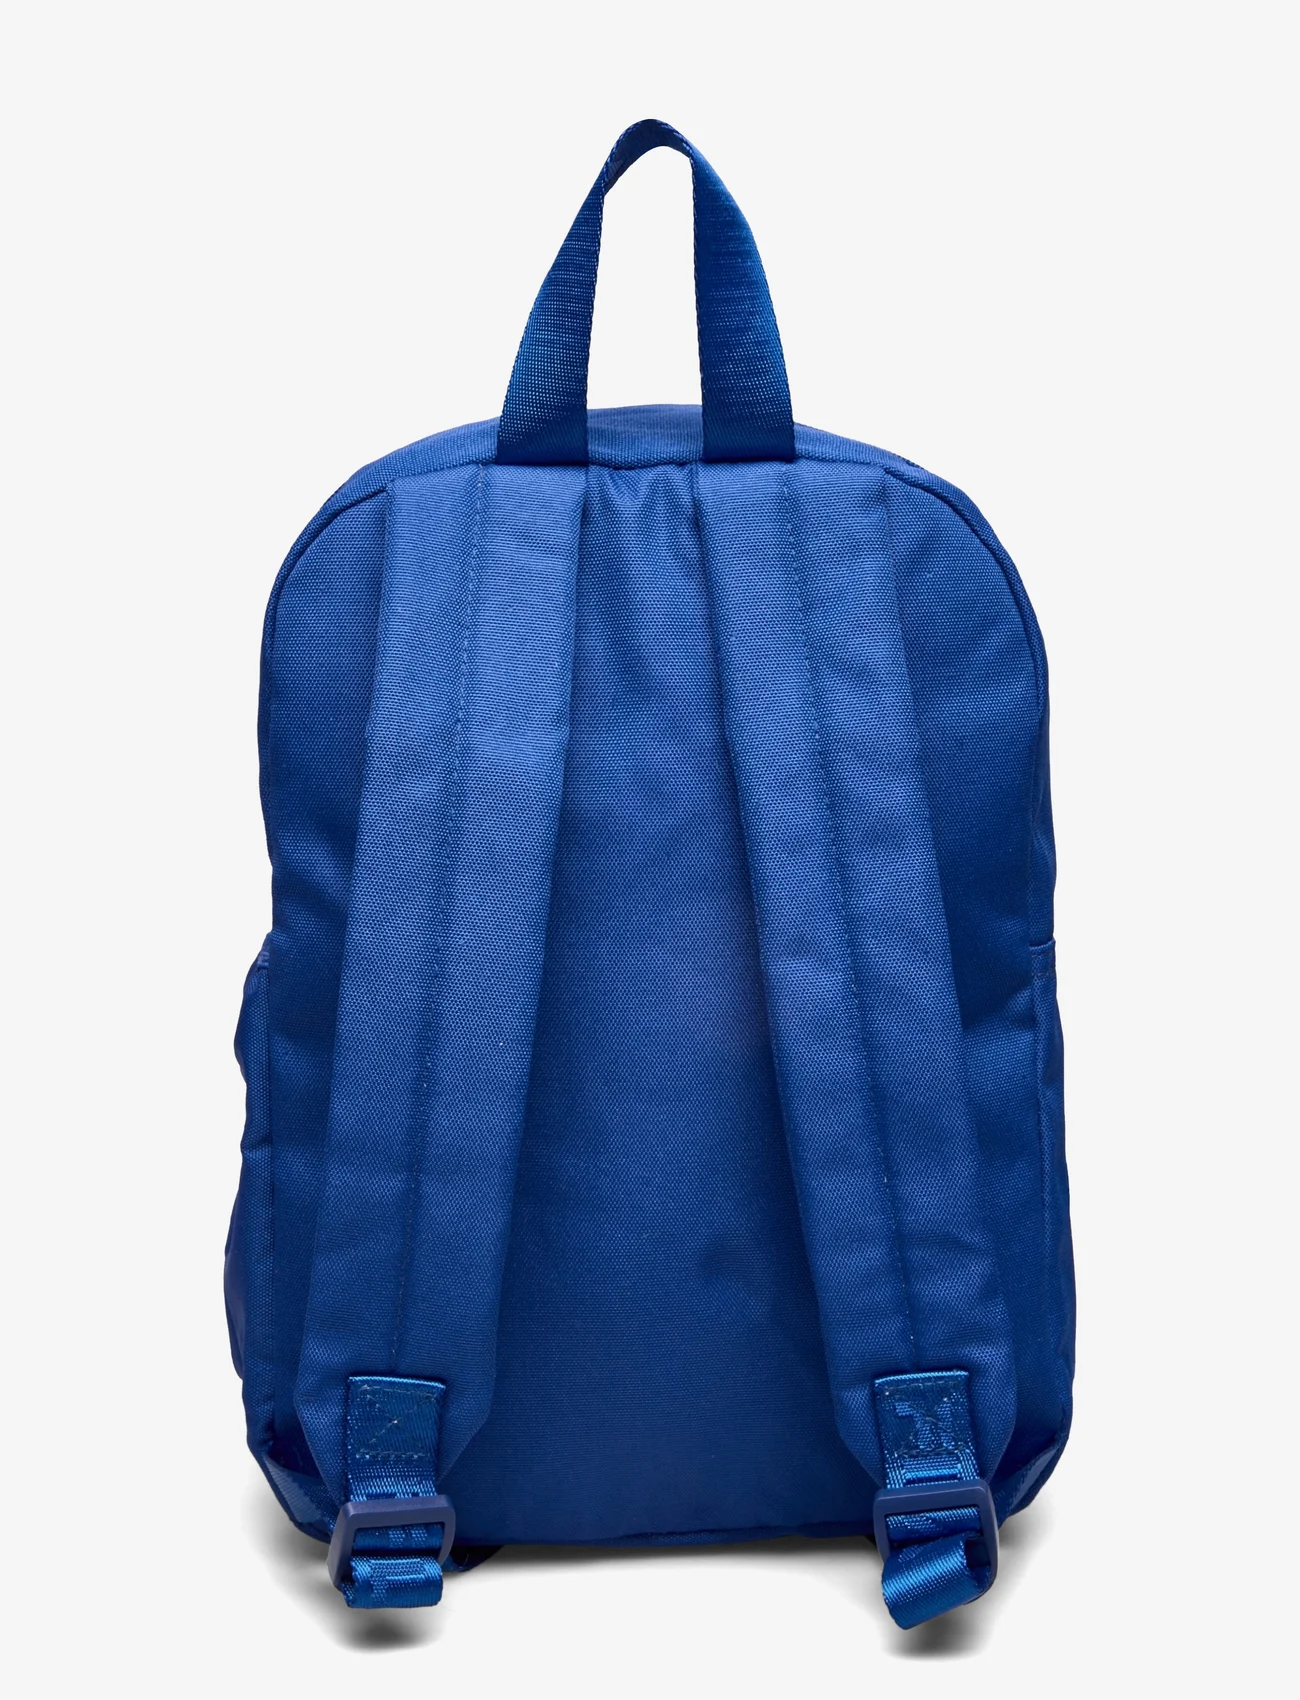 FILA - BURY Small easy backpack - sommerschnäppchen - lapis blue - 1